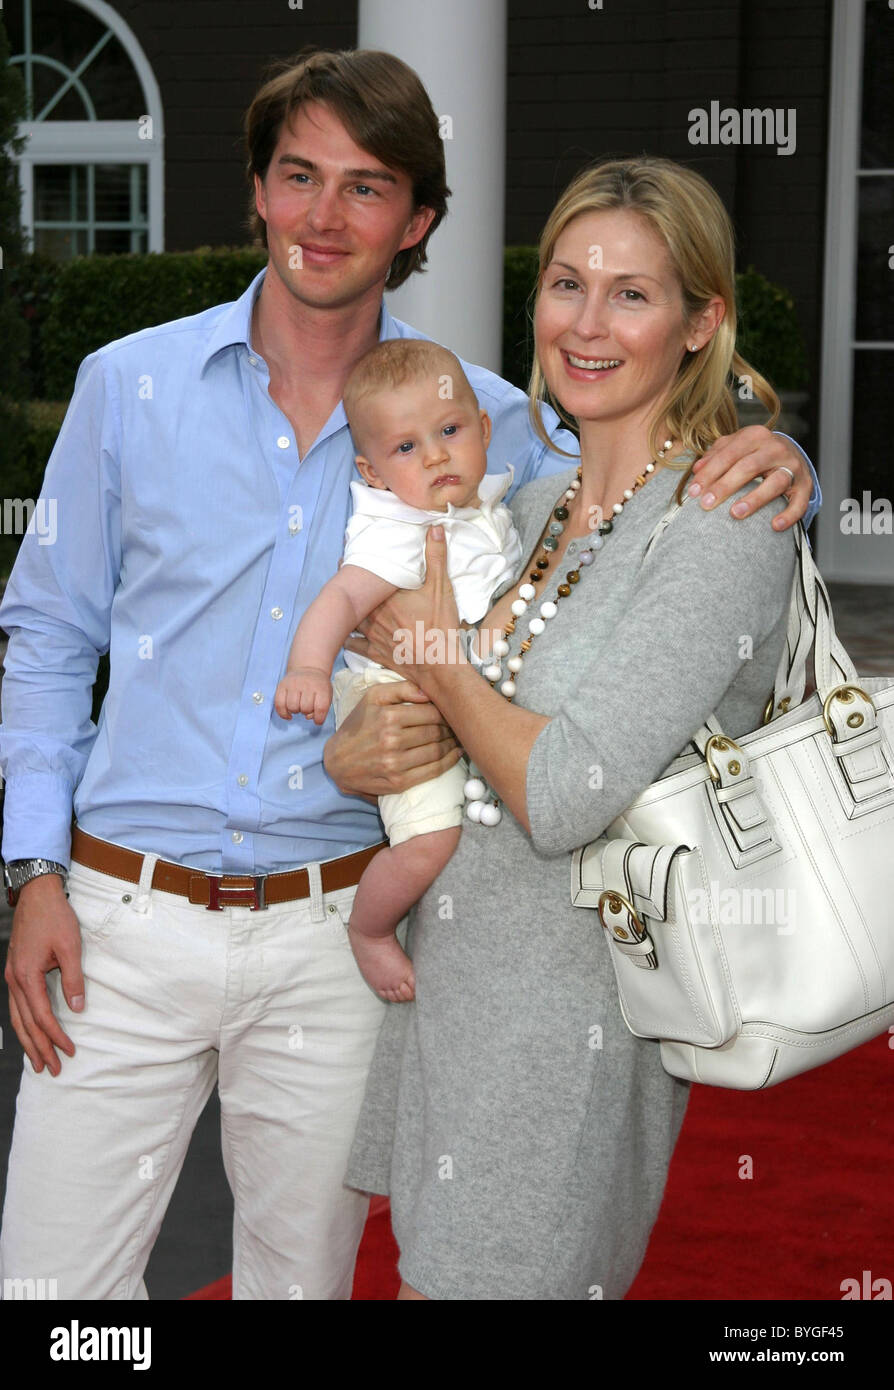 Kelly Rutherford Husband David Giersch And Son Herms Gustaf Daniel Giersch At The Tori Spelling And Dean Mcdermott Bed And Stock Photo Alamy